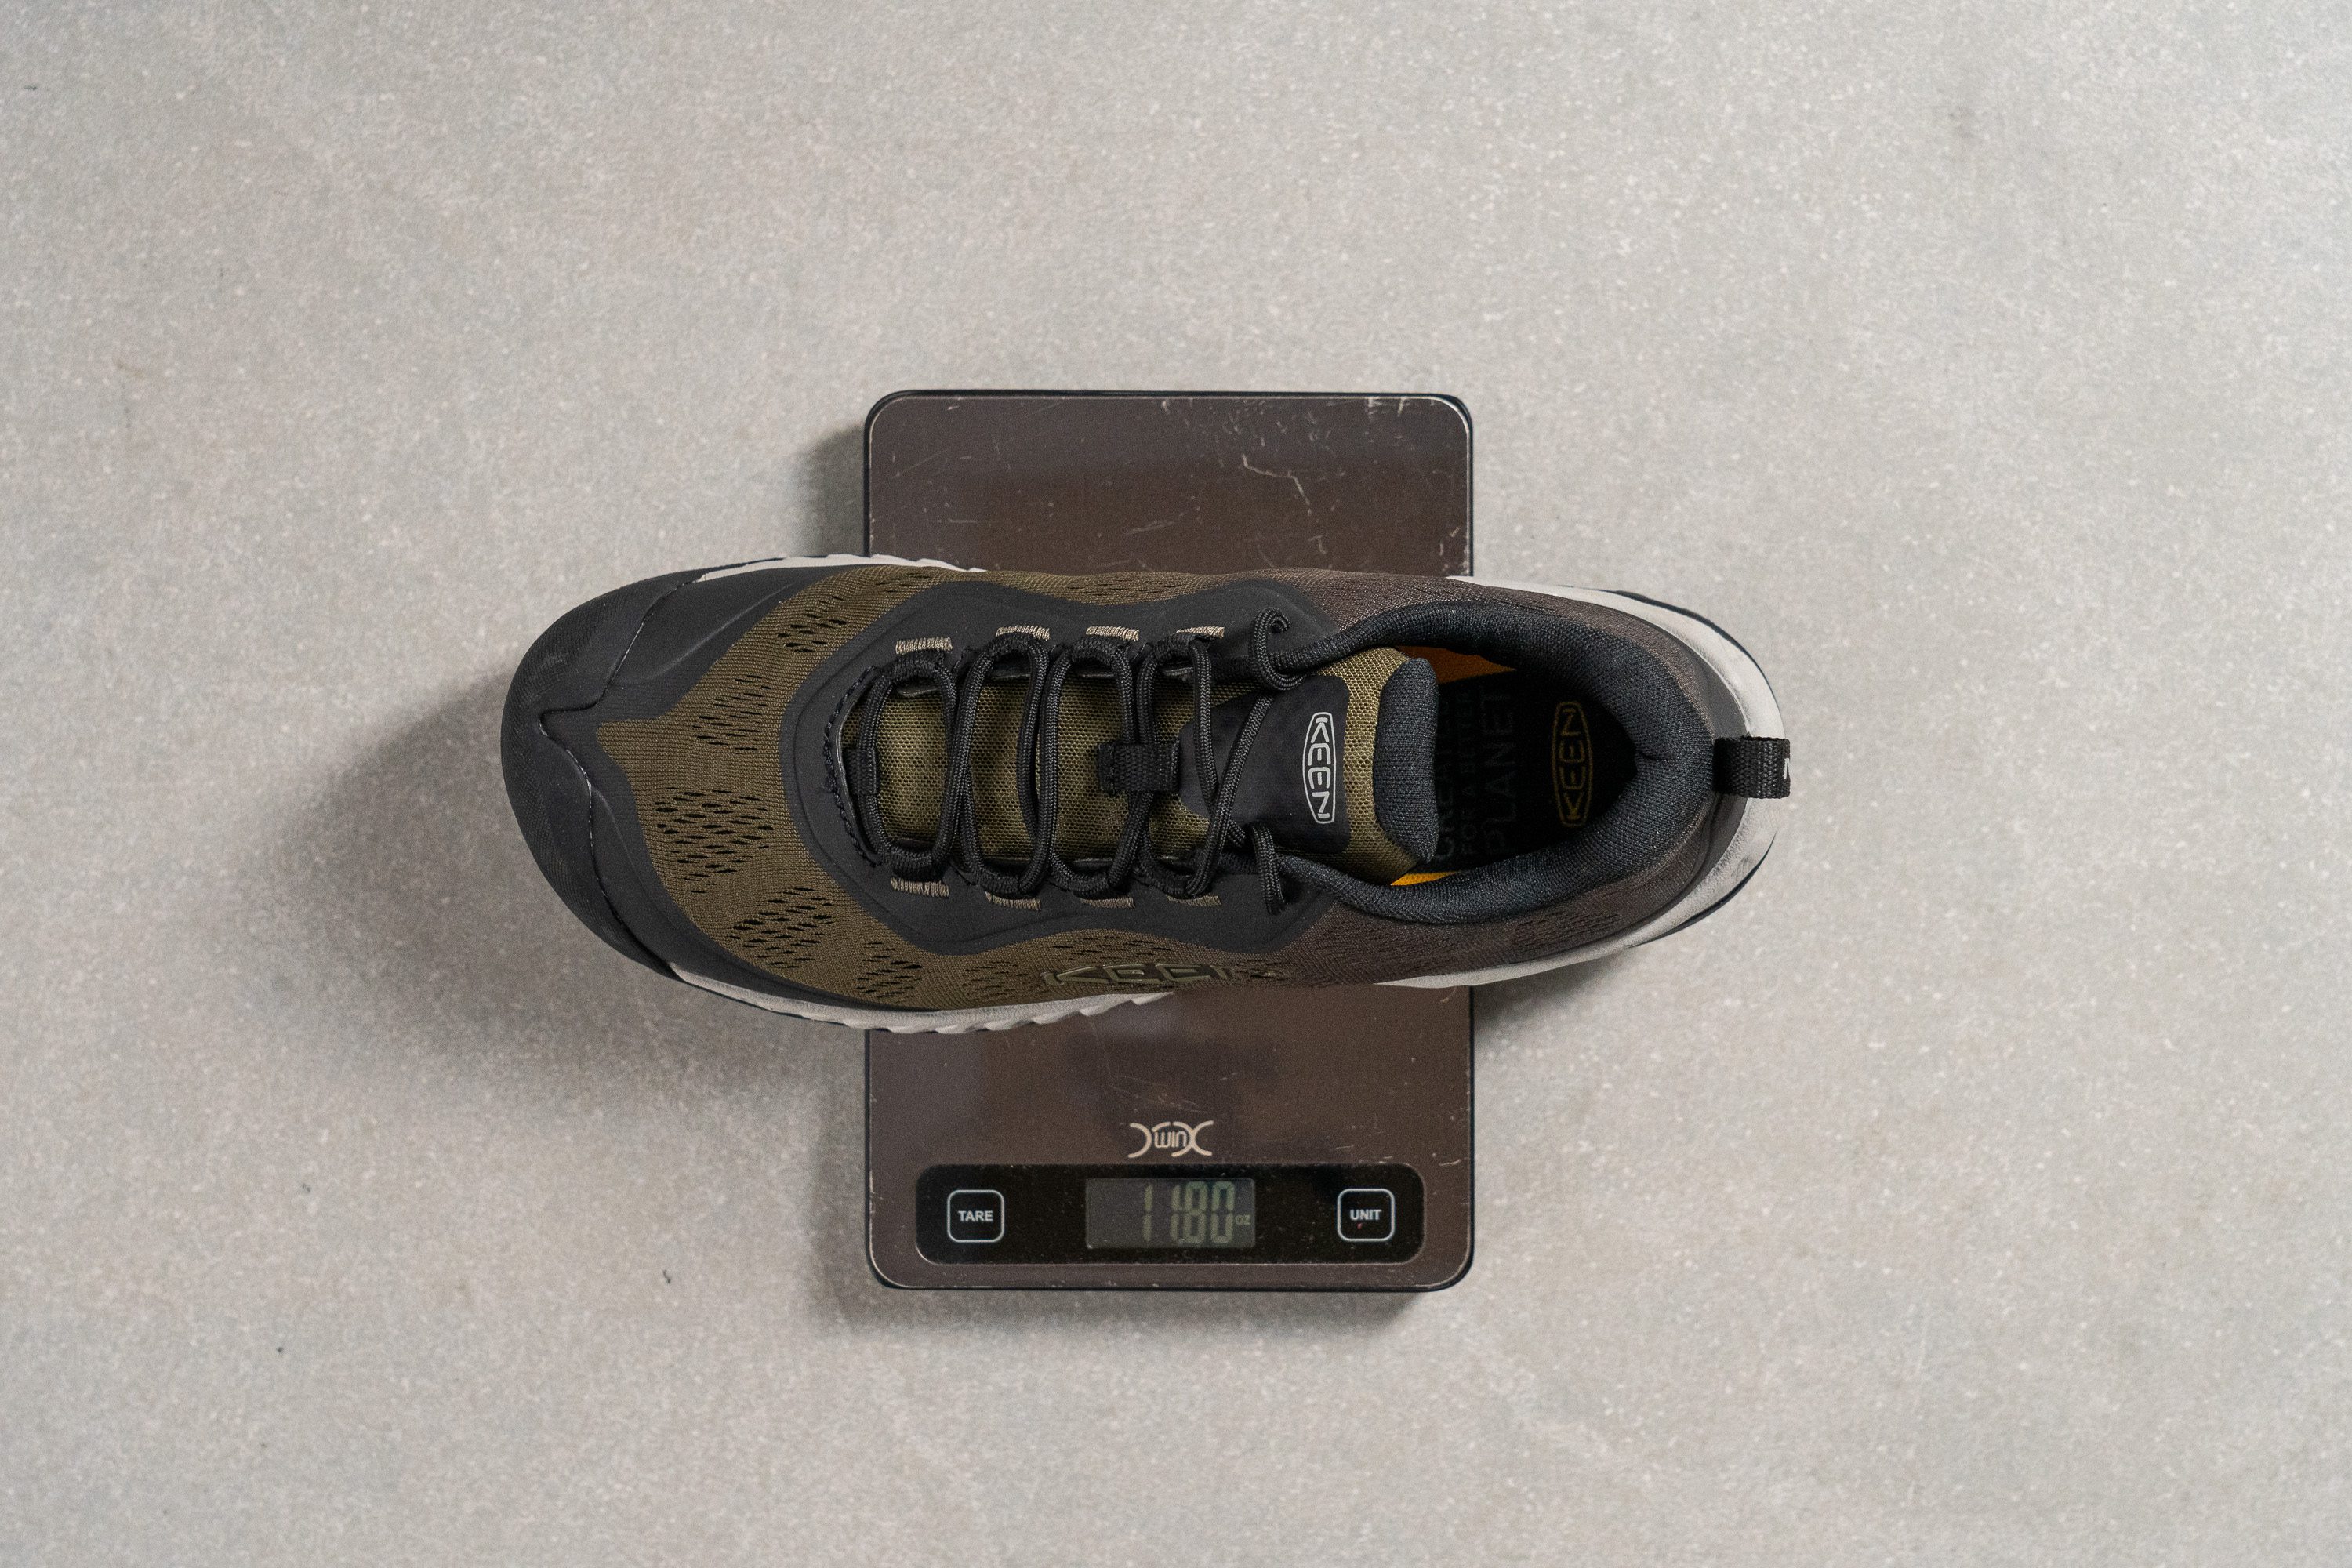 Hikers who prioritize comfort looking for a generously padded and well-cushioned shoe Weight